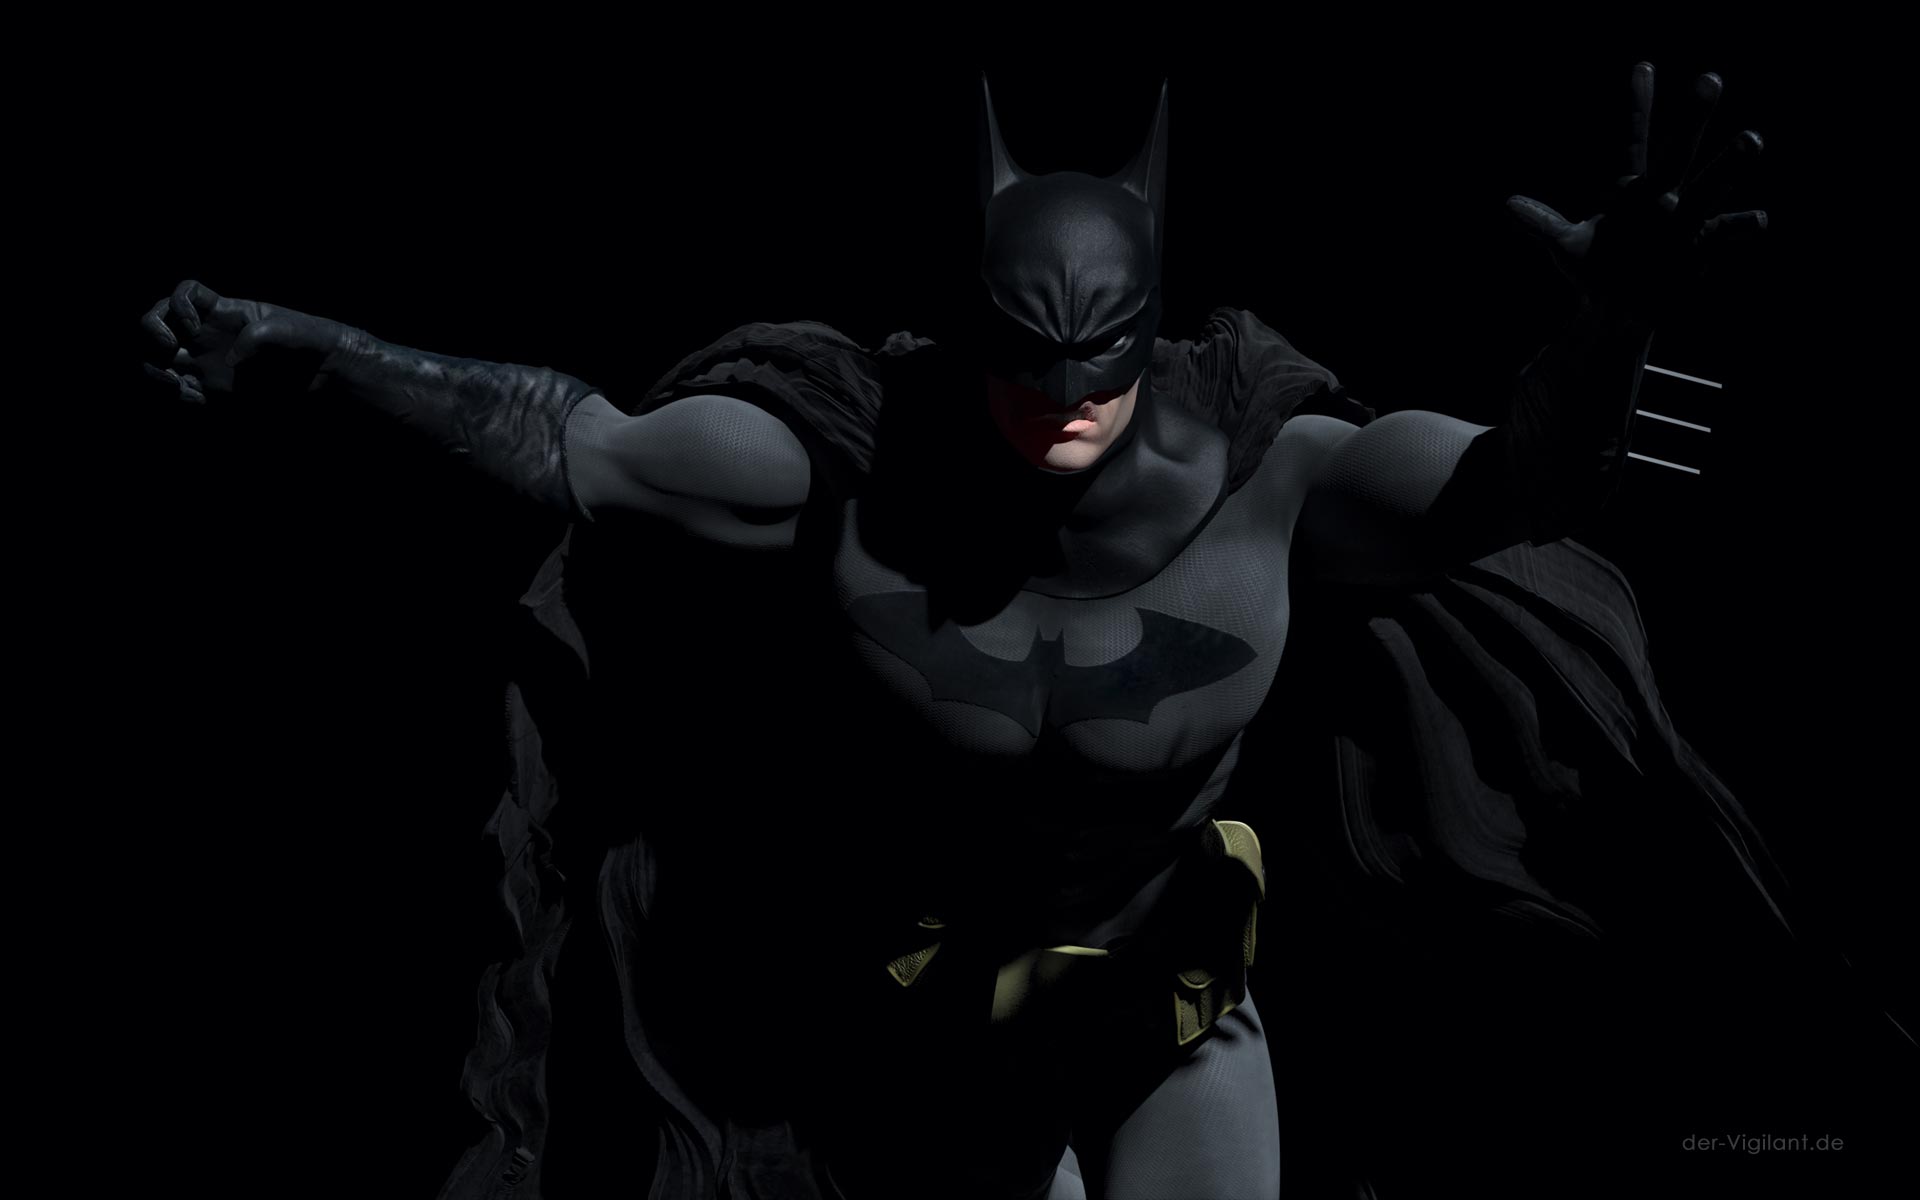 Check This Out Our New Batman Wallpaper